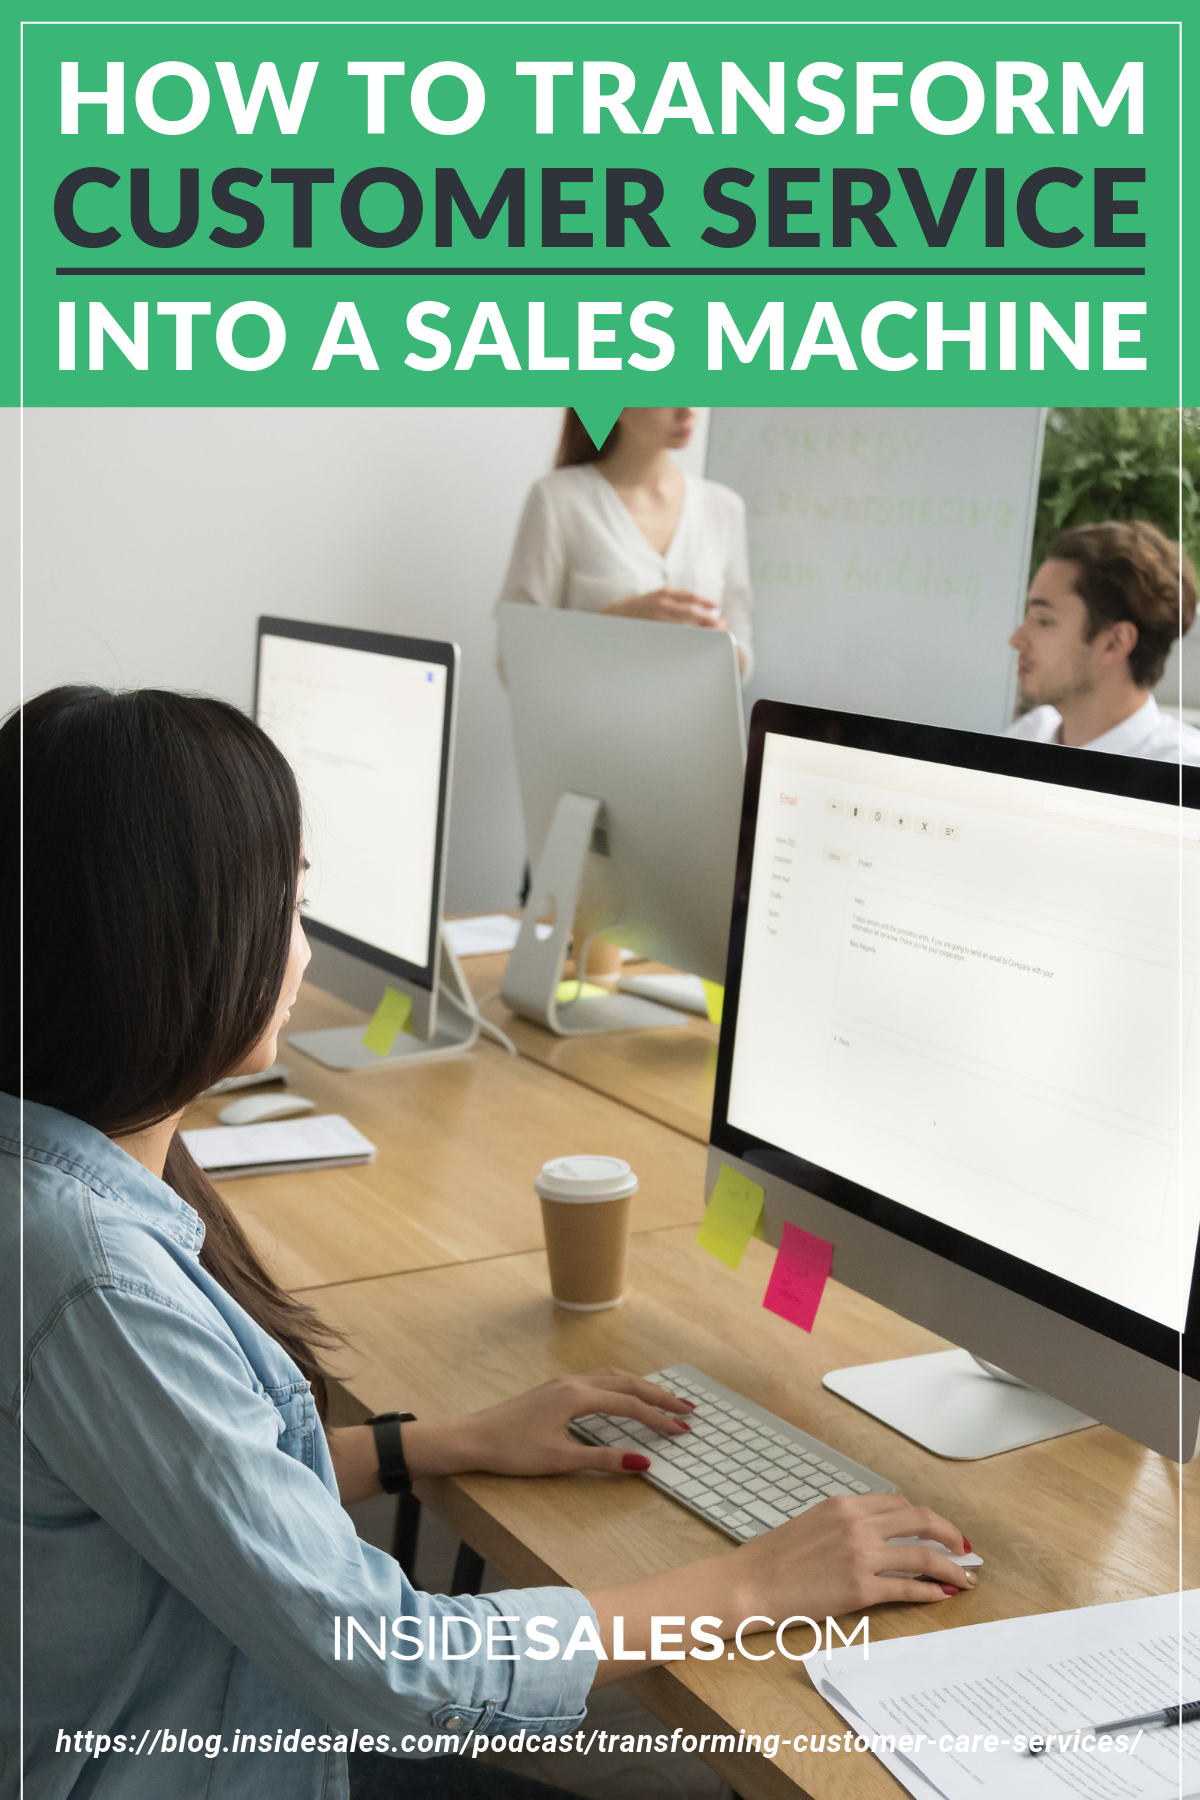 How To Transform Customer Service Into A Sales Machine https://resources.insidesales.com/blog/podcast/transforming-customer-care-services/